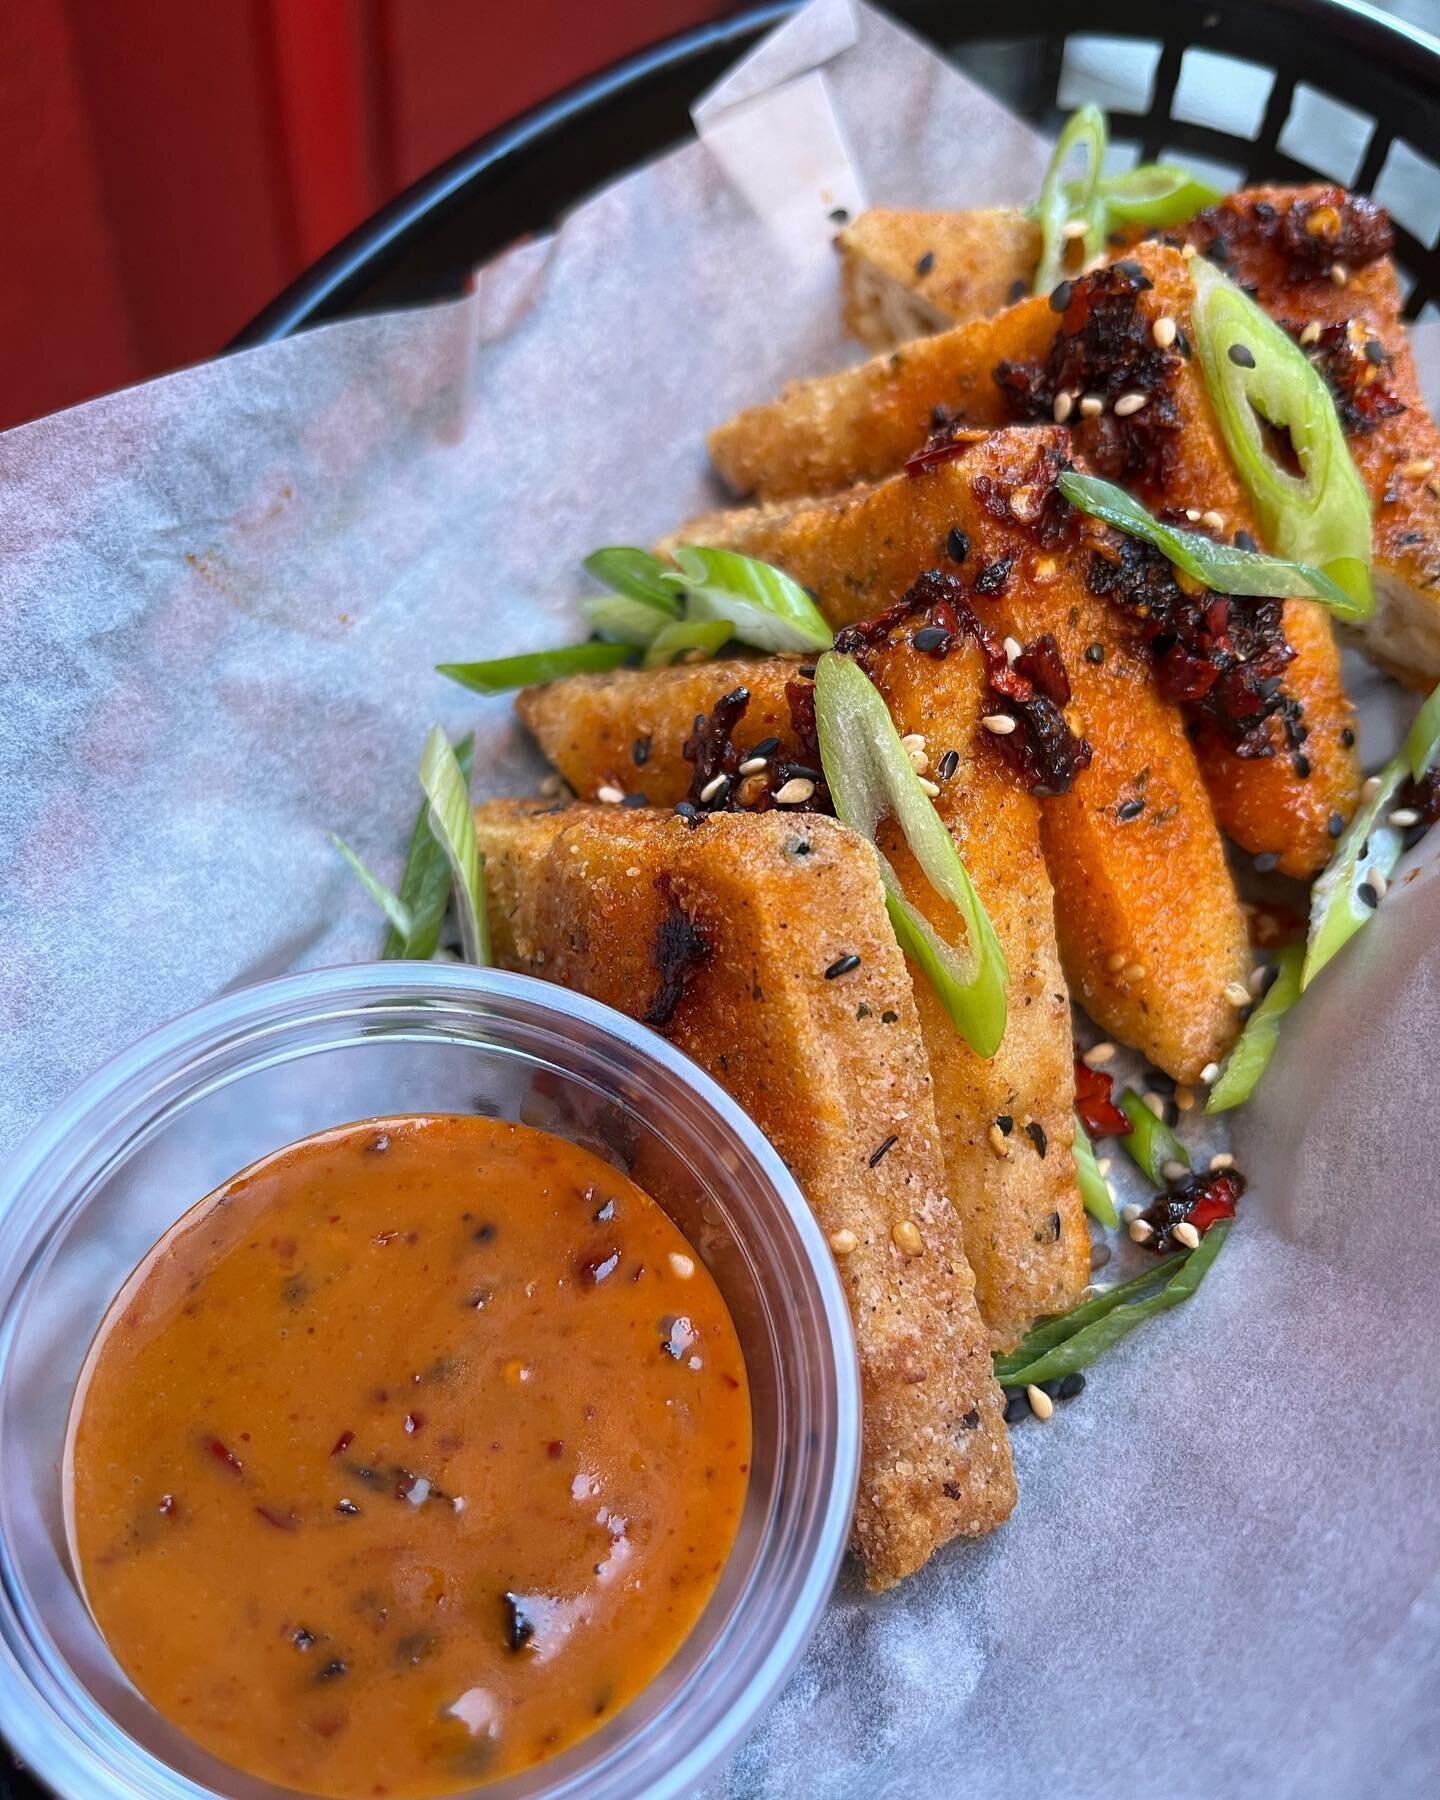 Run quick chef @chaotic.hot has a Sunday special on for the day 
Salt and chilli tofu toast served with chilli crisp and siracha mayo

#vegandublin